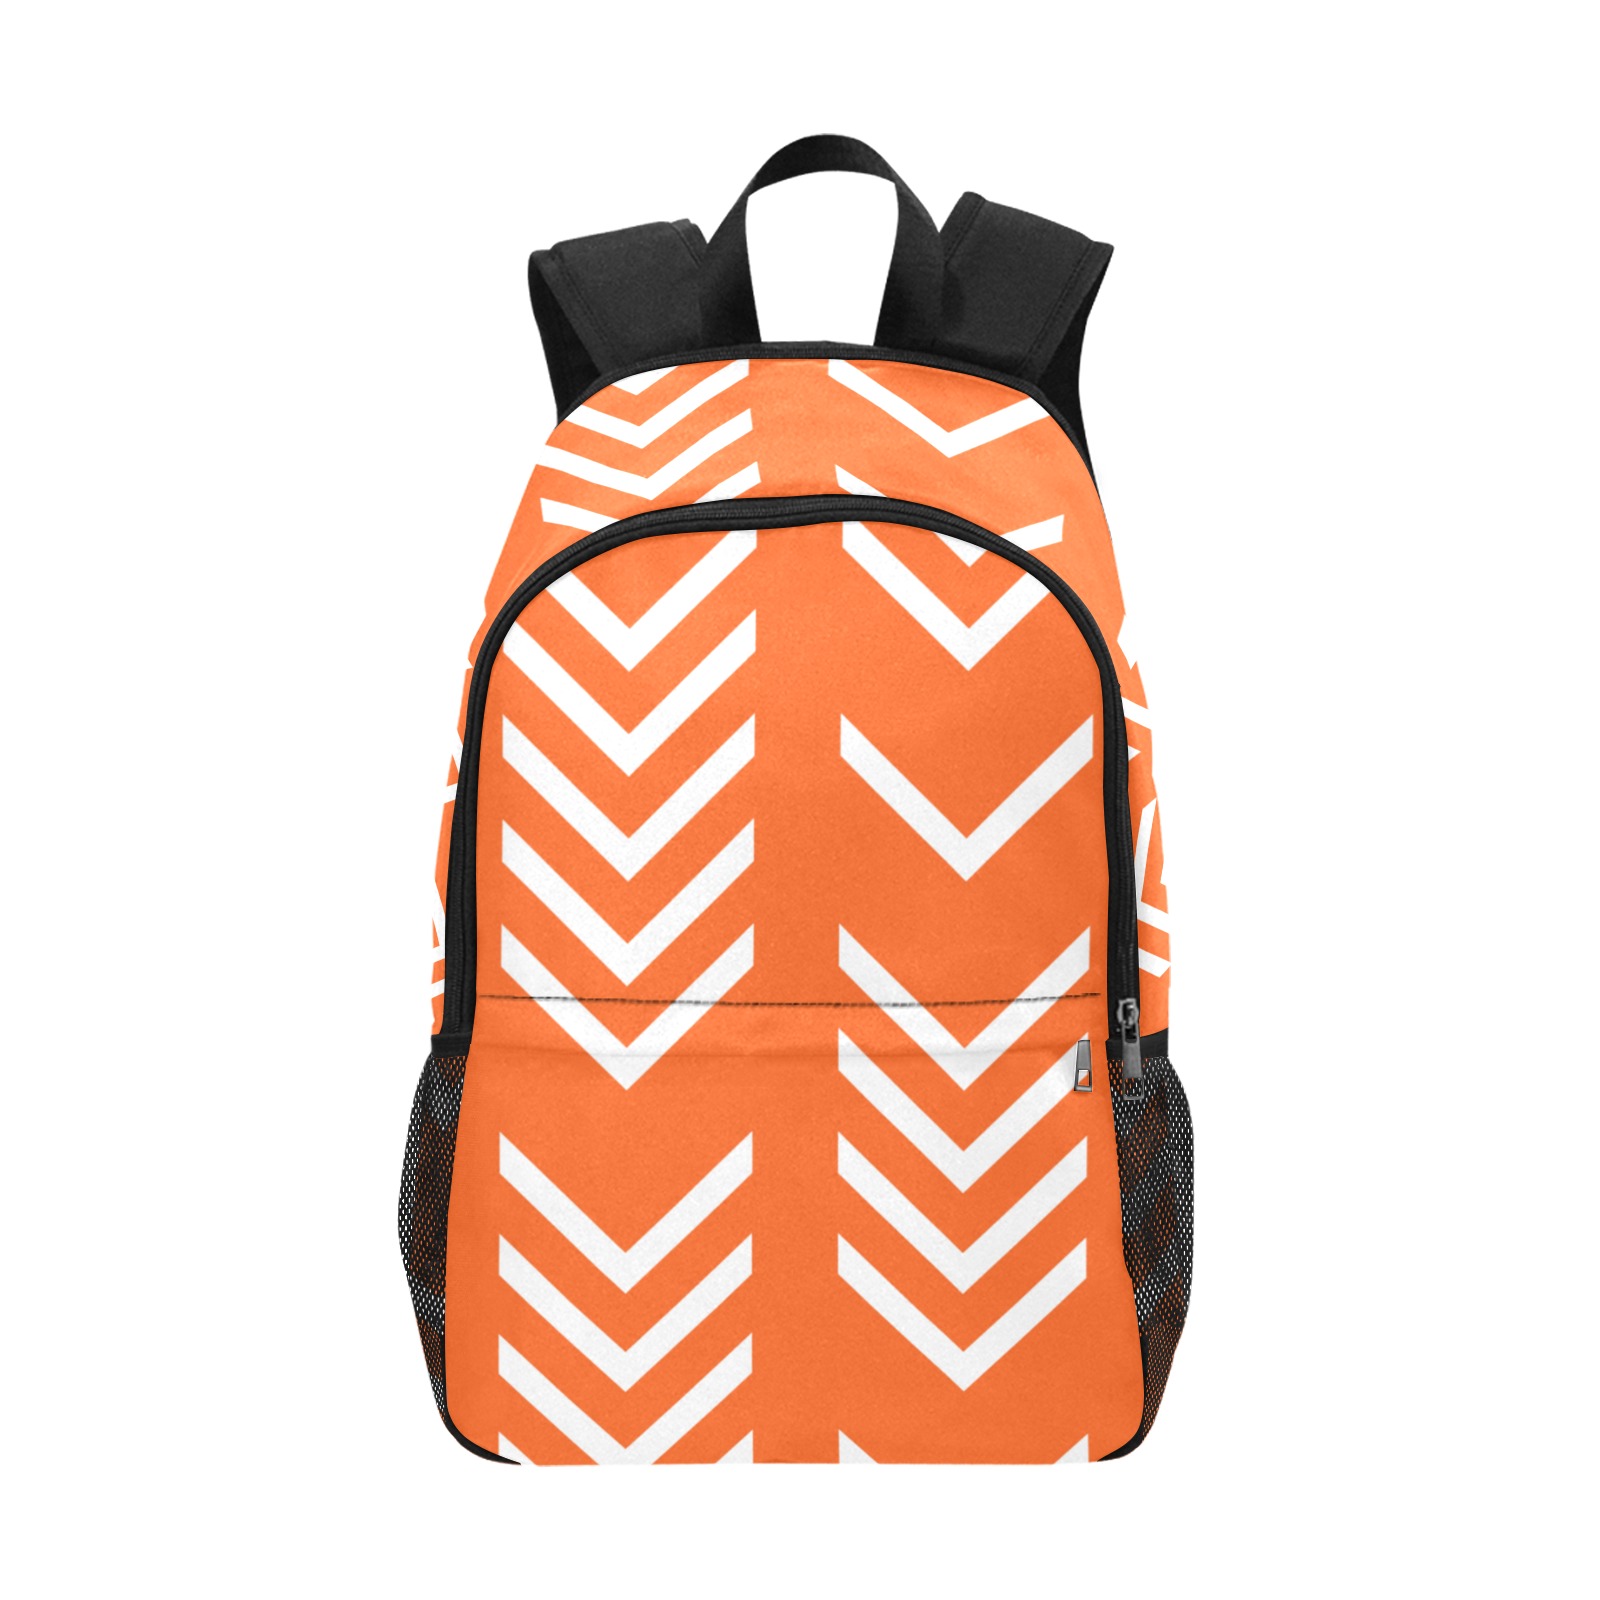 white_arrows_orange_background_seamless_pattern Fabric Backpack with ...